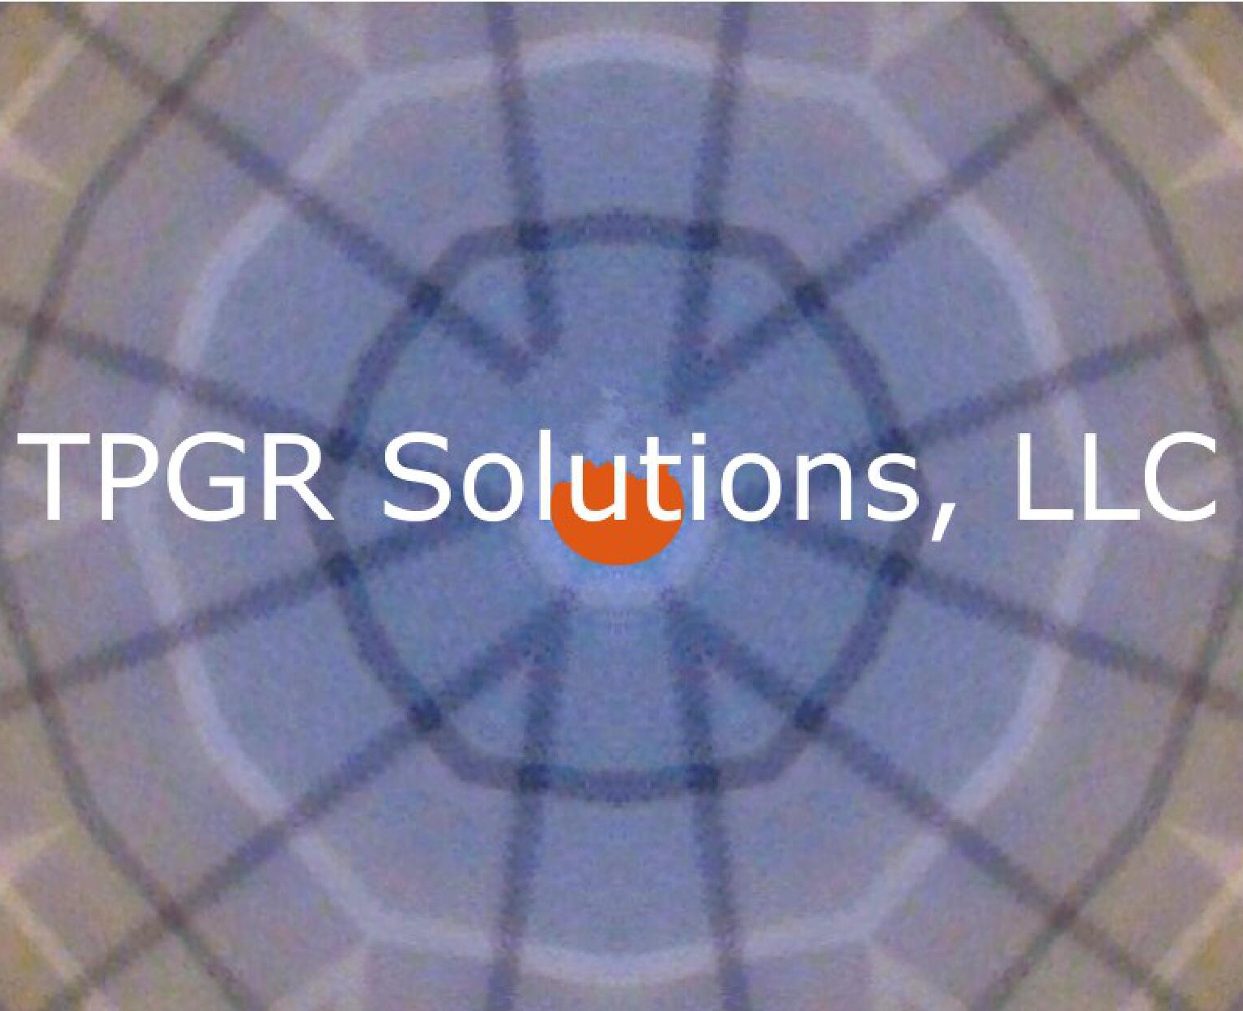 TPGR Solutions